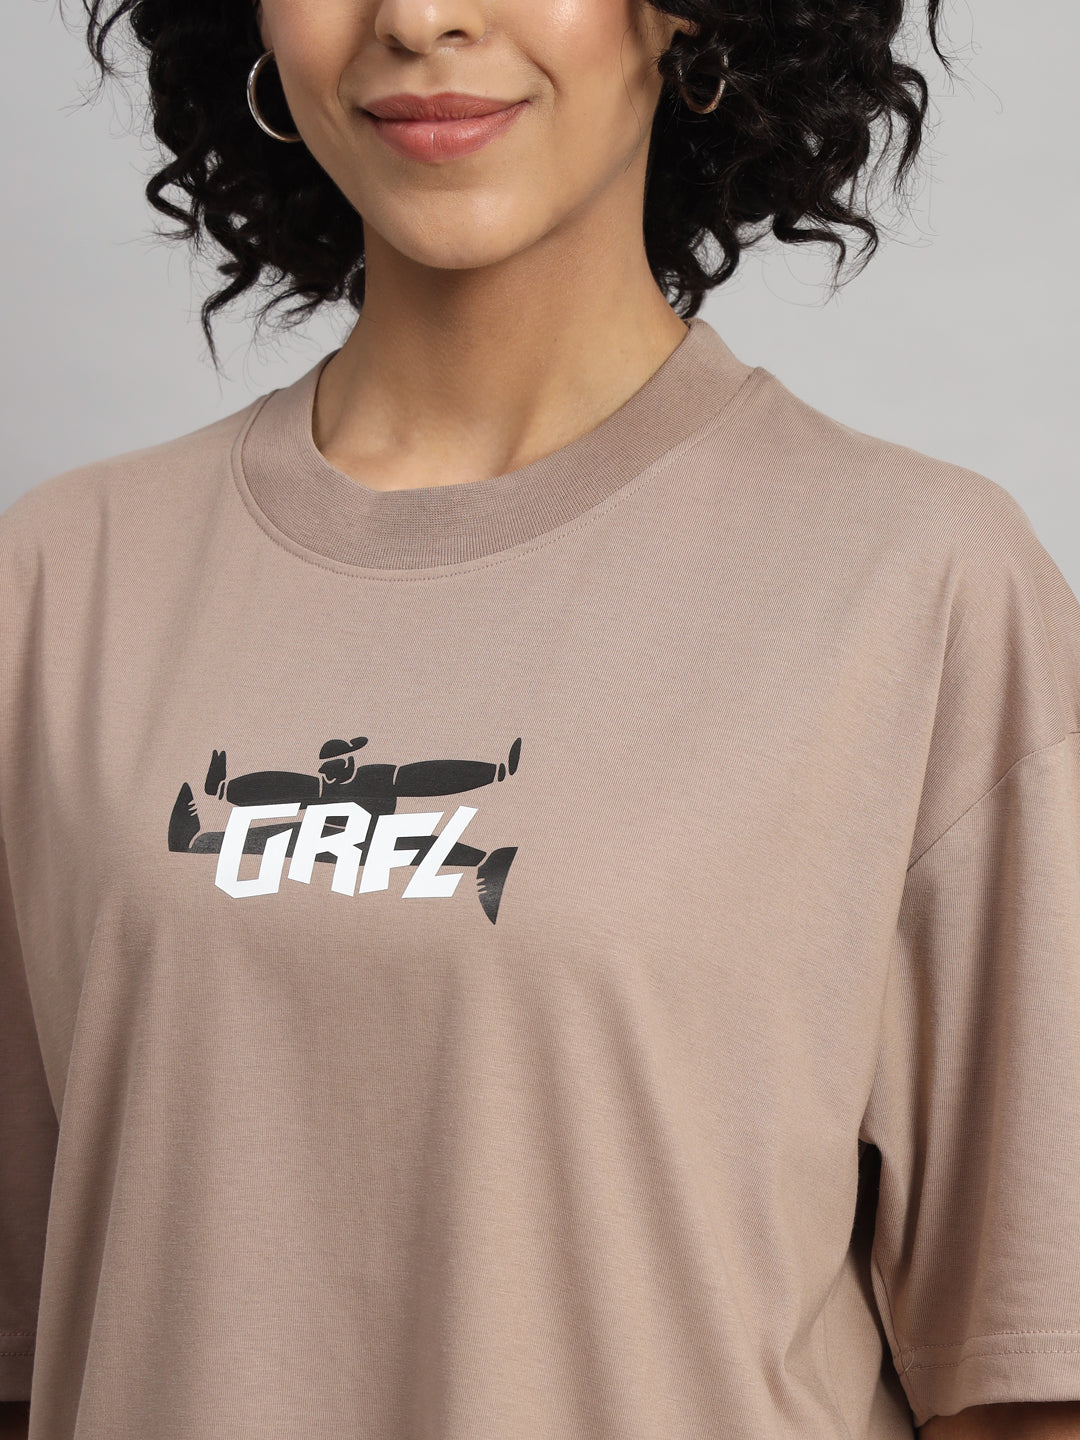 Martial Arts Oversized T-shirt - griffel